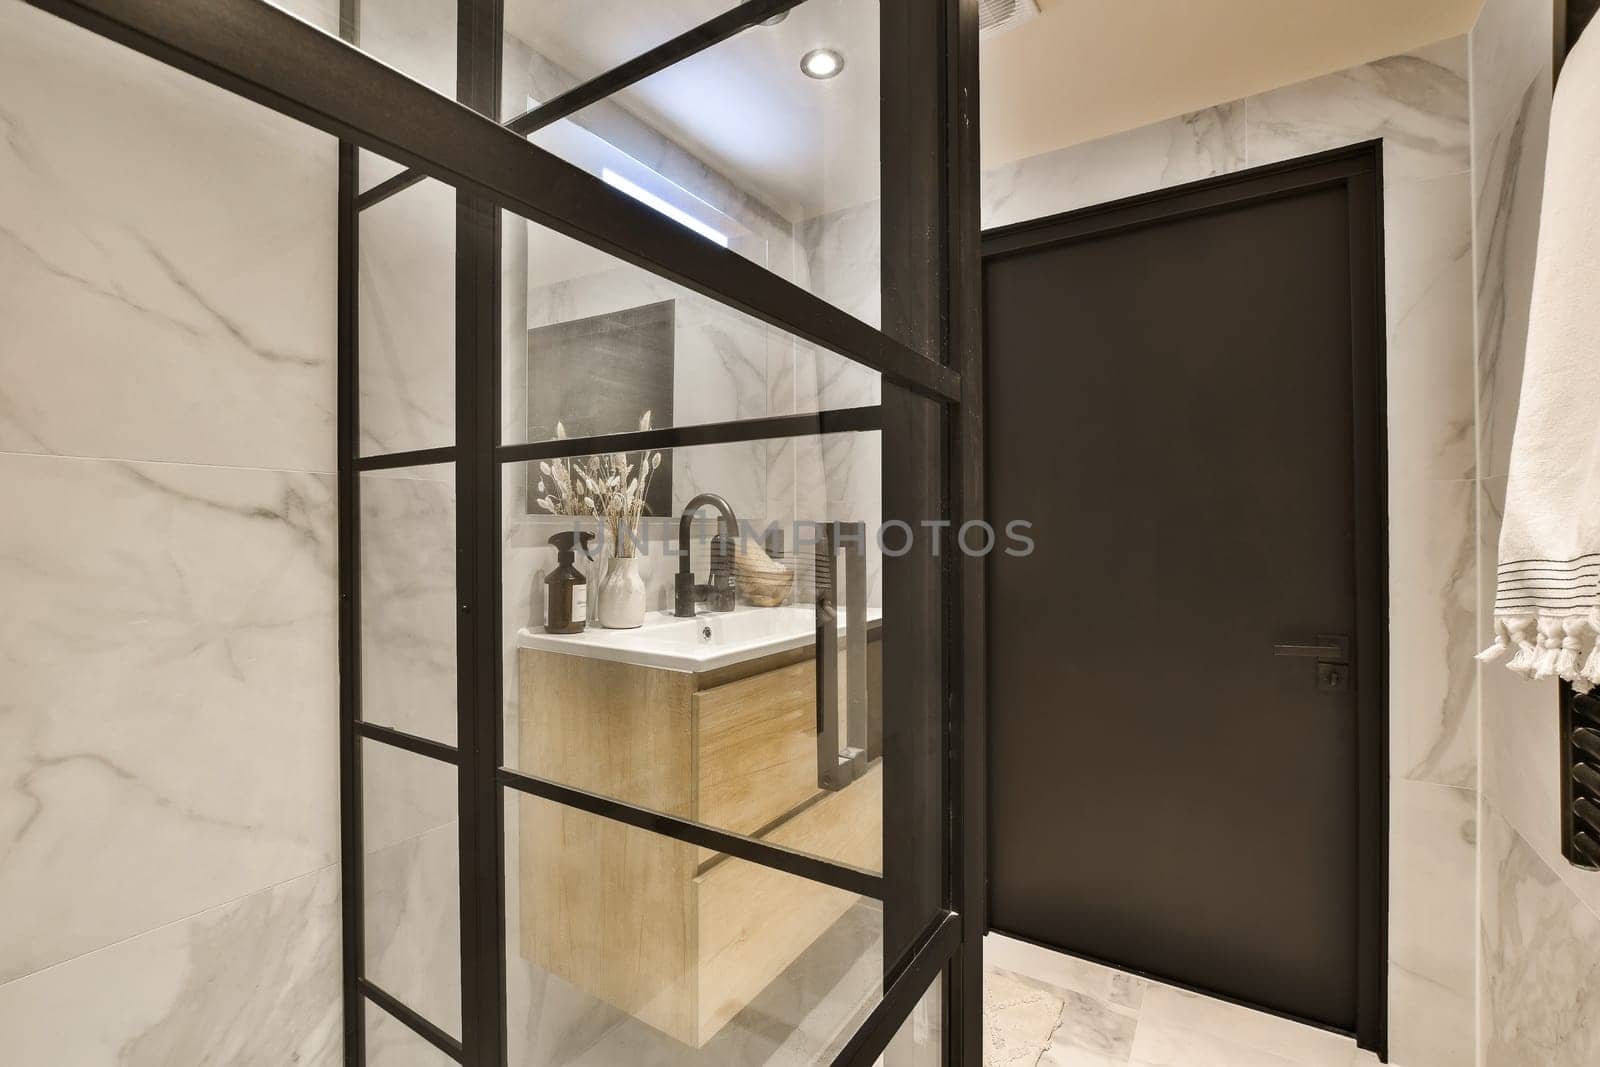 a bathroom with white marble walls and black trim around the shower door, which is open to reveal a large mirror